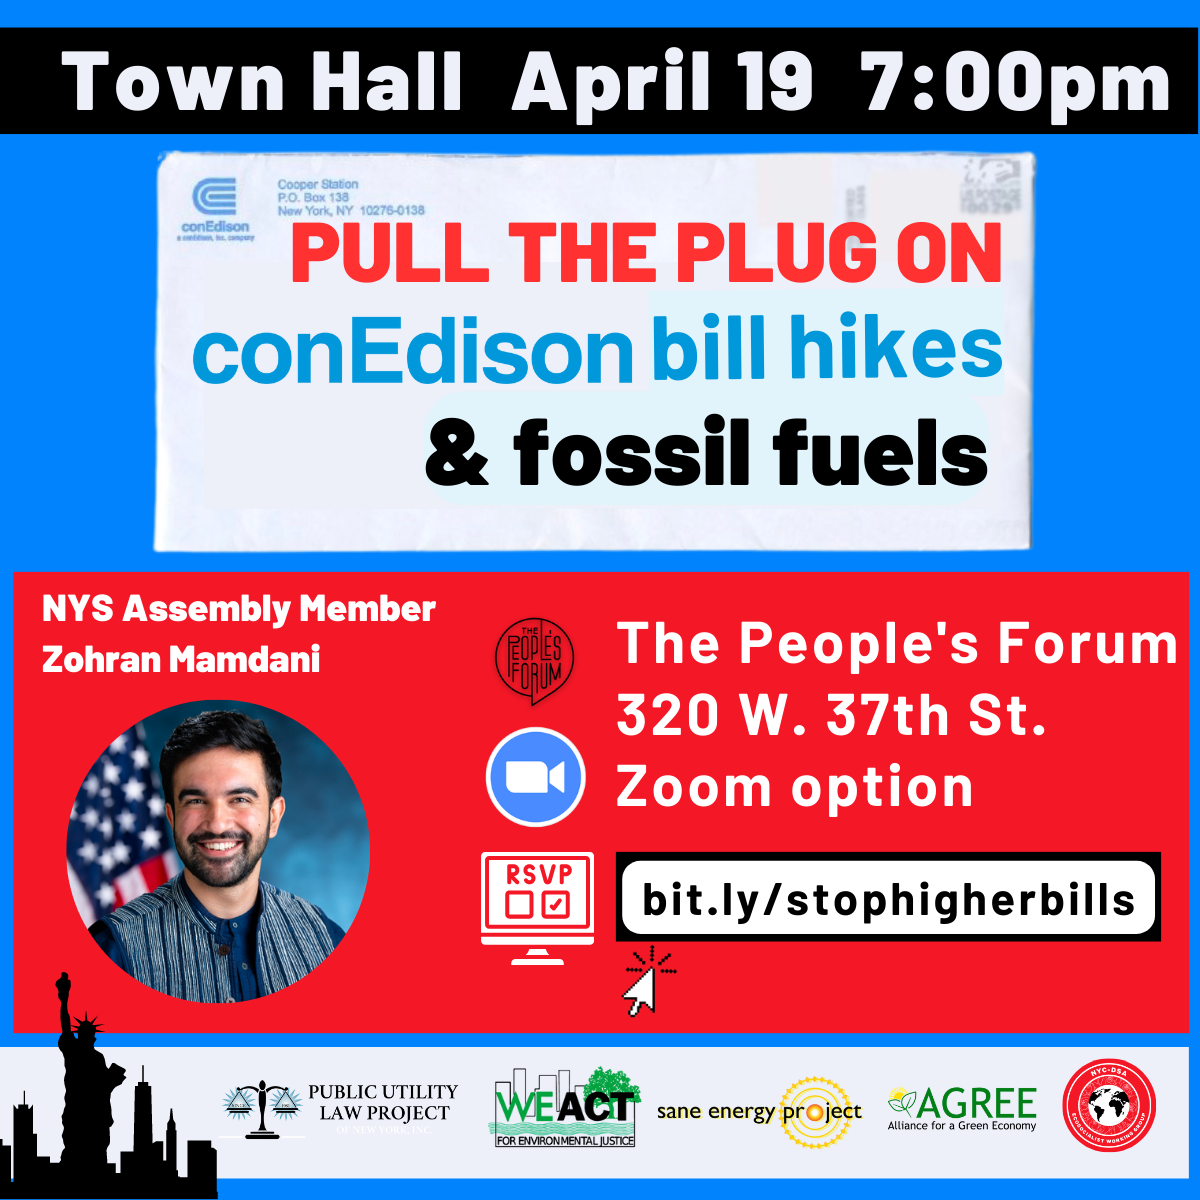 Town Hall April 19 7 pm. Pull the plug on con edison bill hikes and fossil fuels. The people's forum 320 w 37 st. Zoom option.